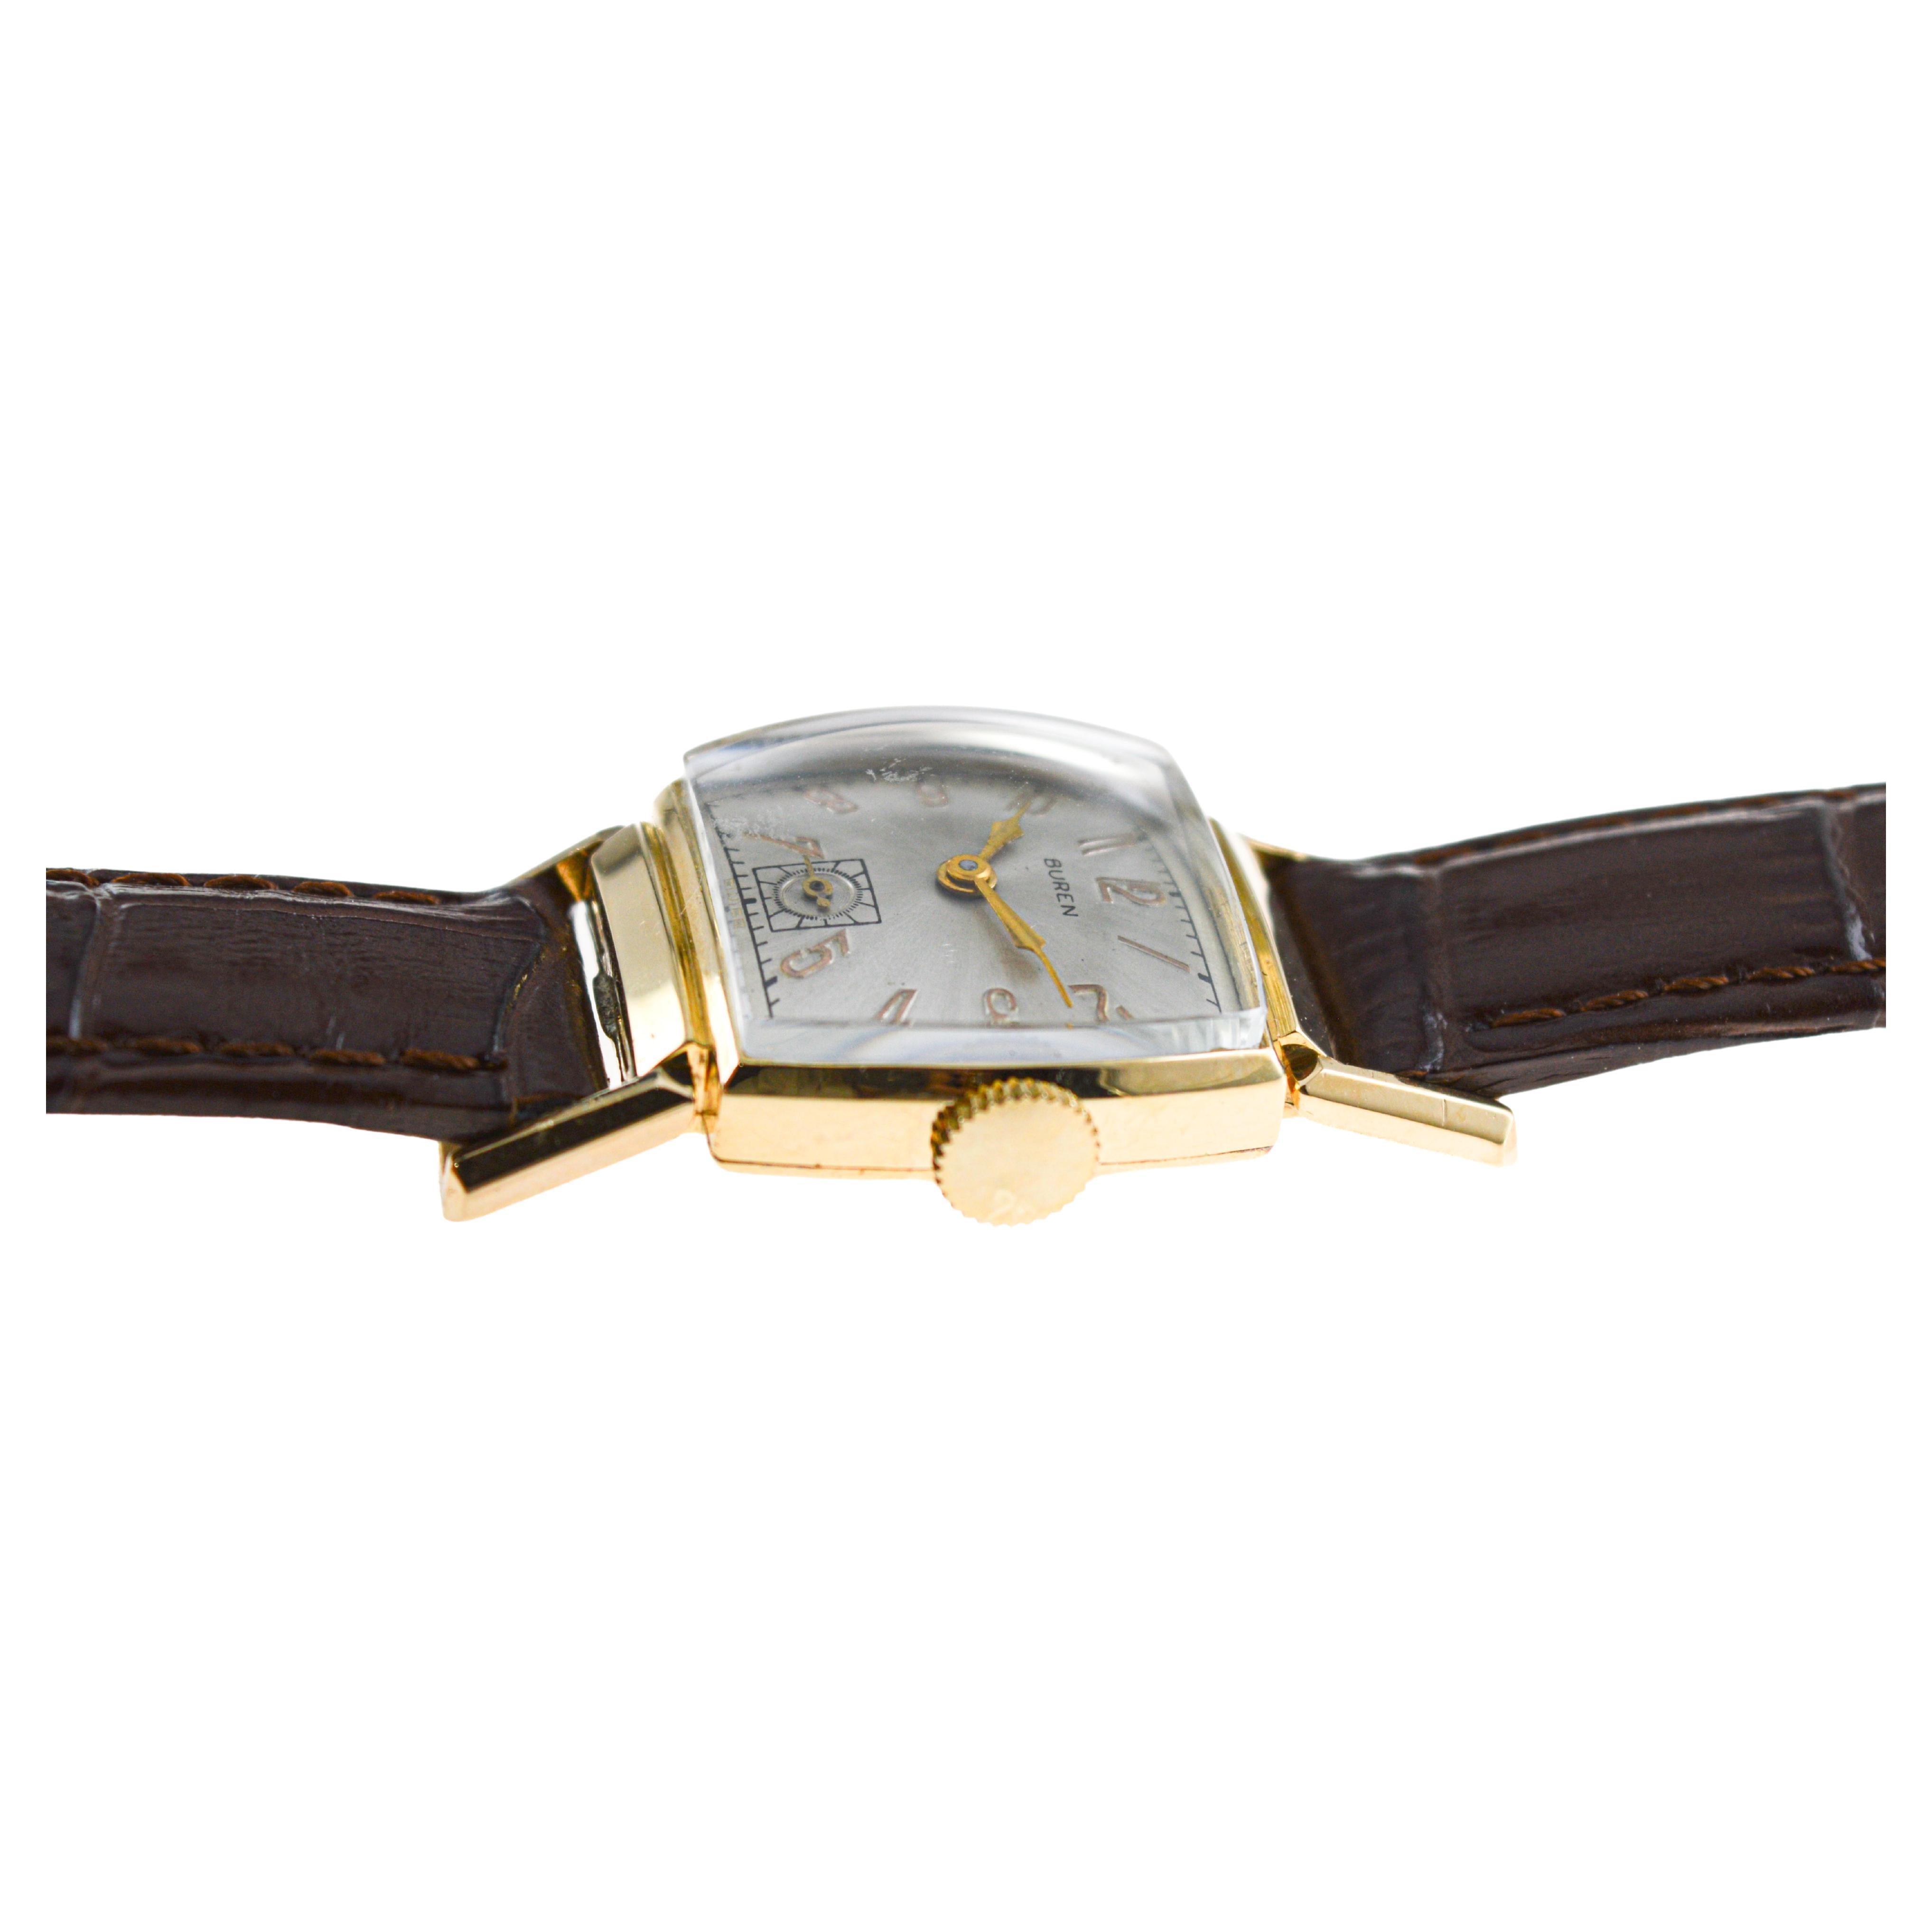 Buren Gold Filled Art Deco Watch with Articulated Lugs From the 1940's For Sale 4